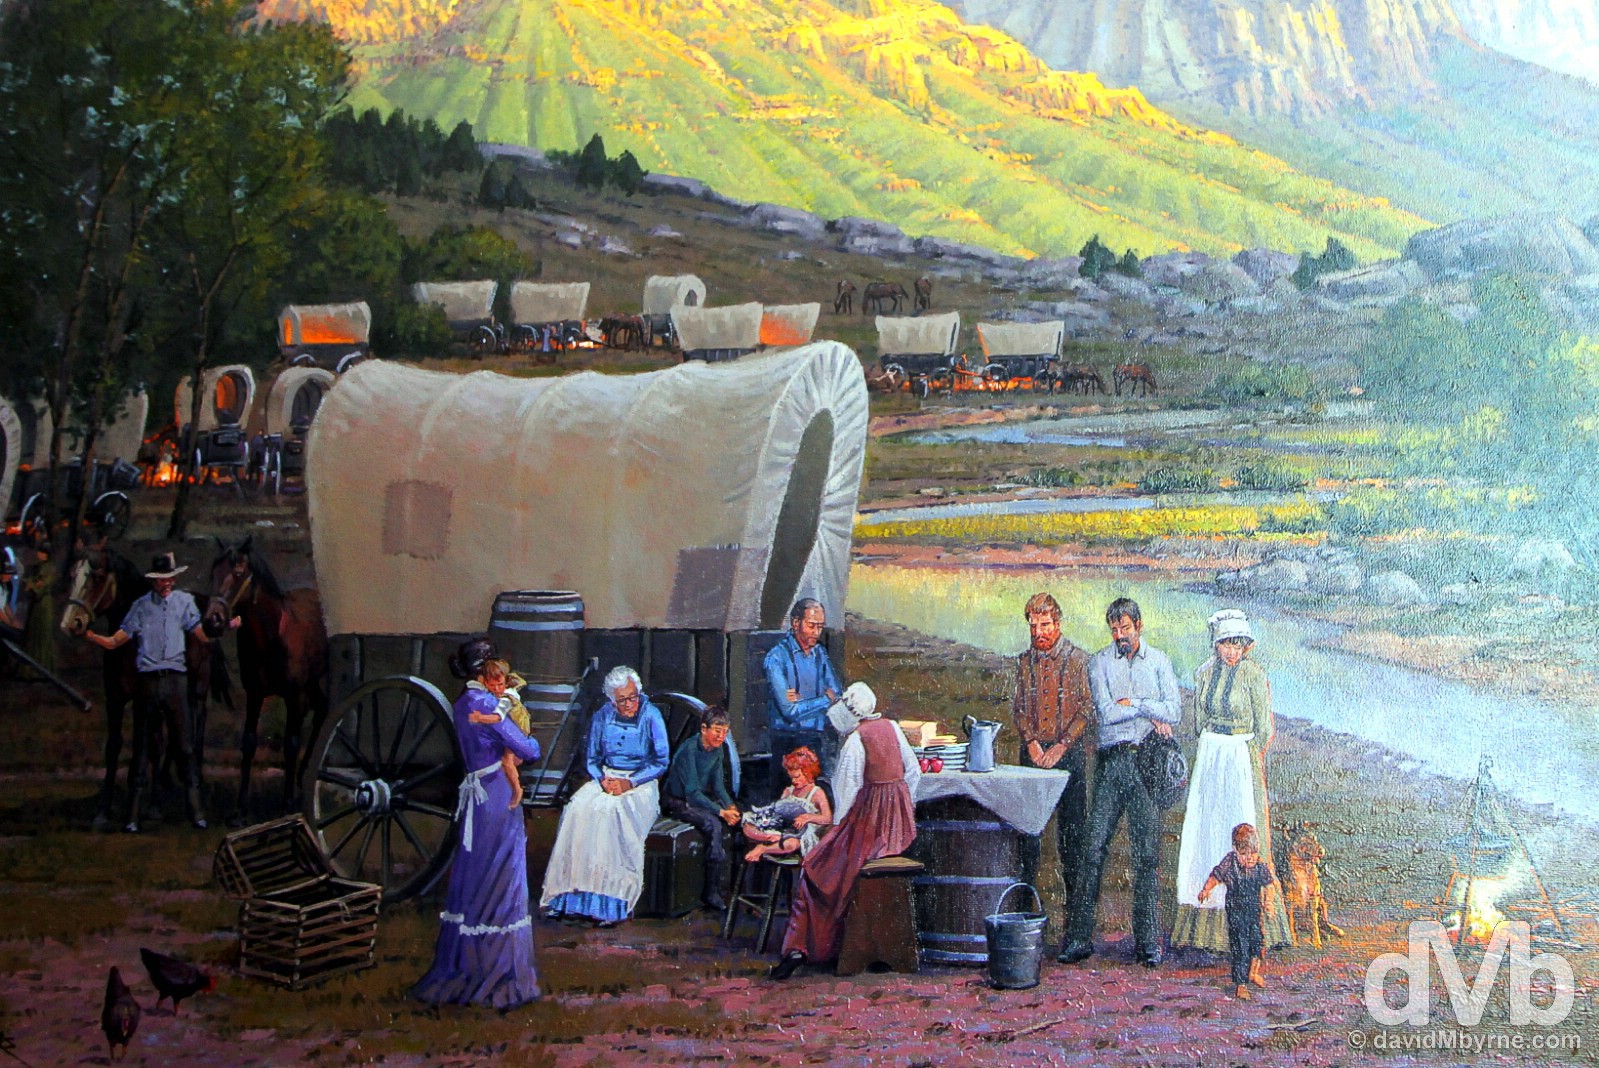 A Mormon wagon train painting in the Church of Jesus Christ of Later-Day Saints Conference Center, Salt Lake City, Utah, USA. September 7, 2016.